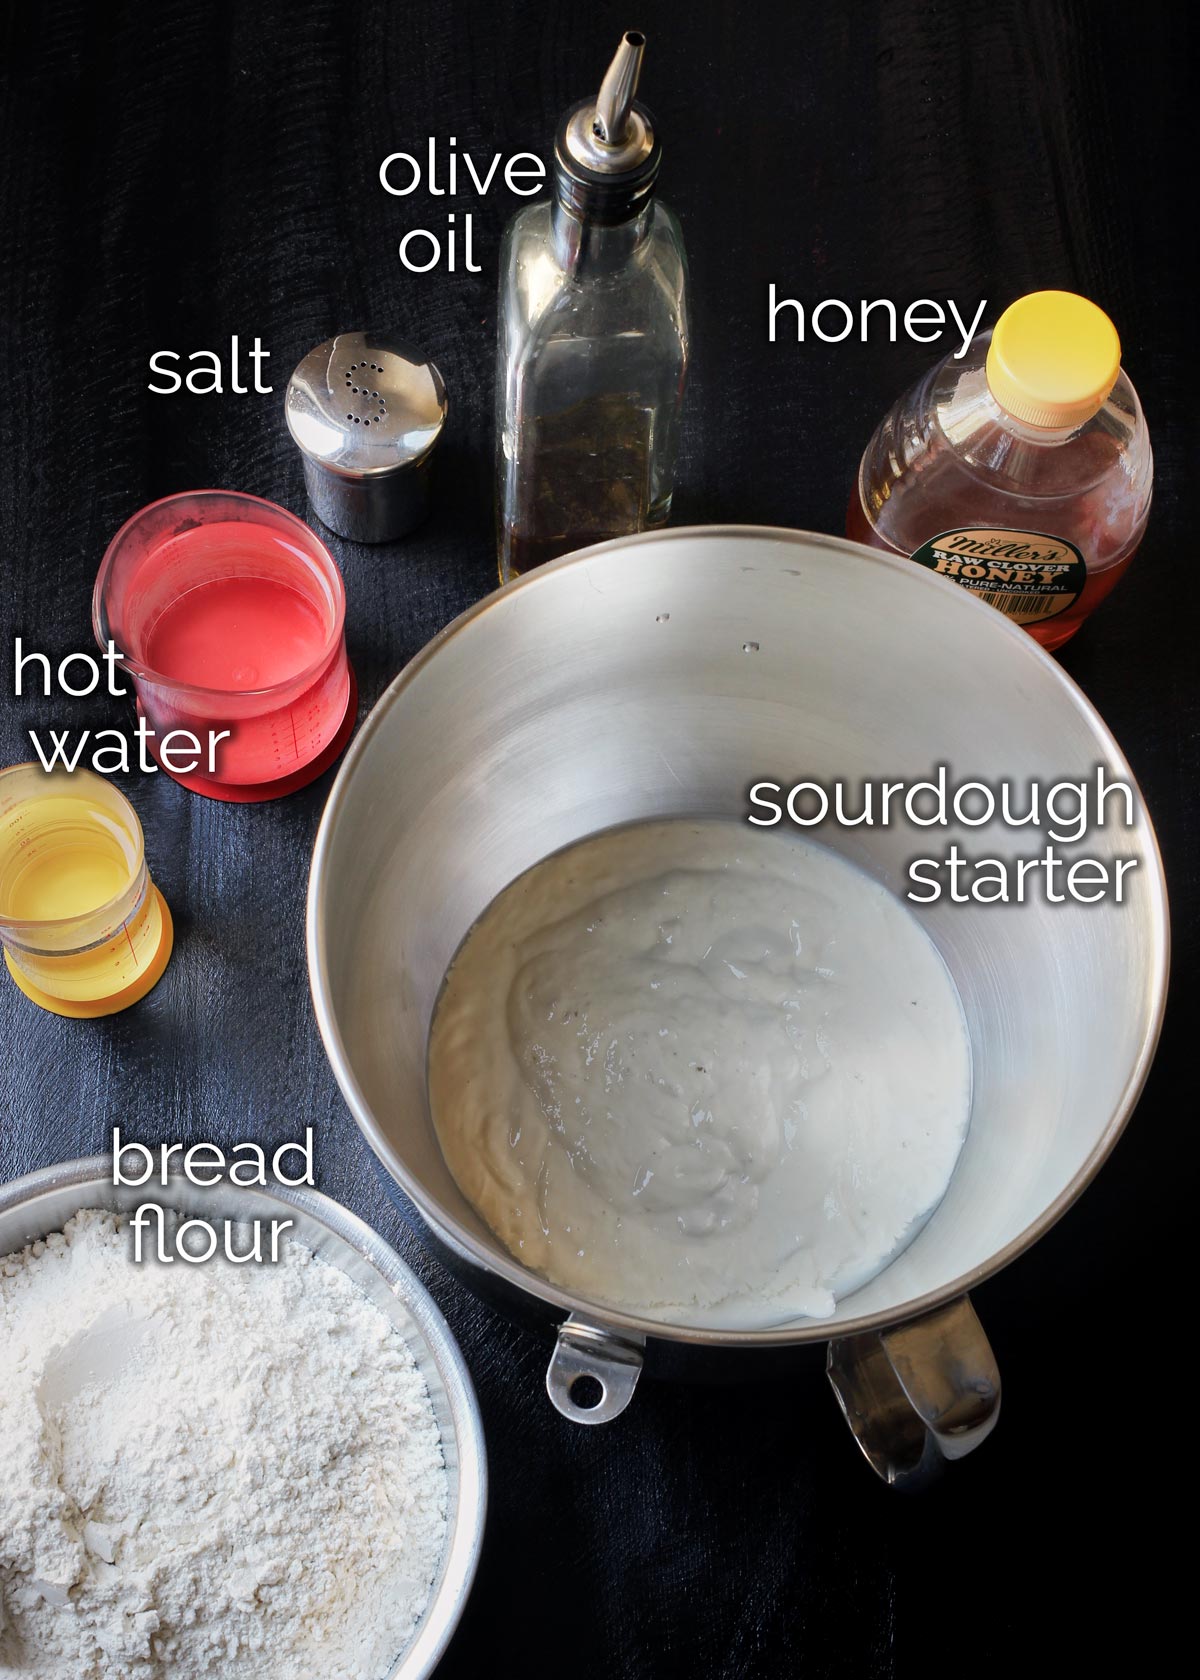 ingredients to make homemade sourdough pizza measured out and on work surface.